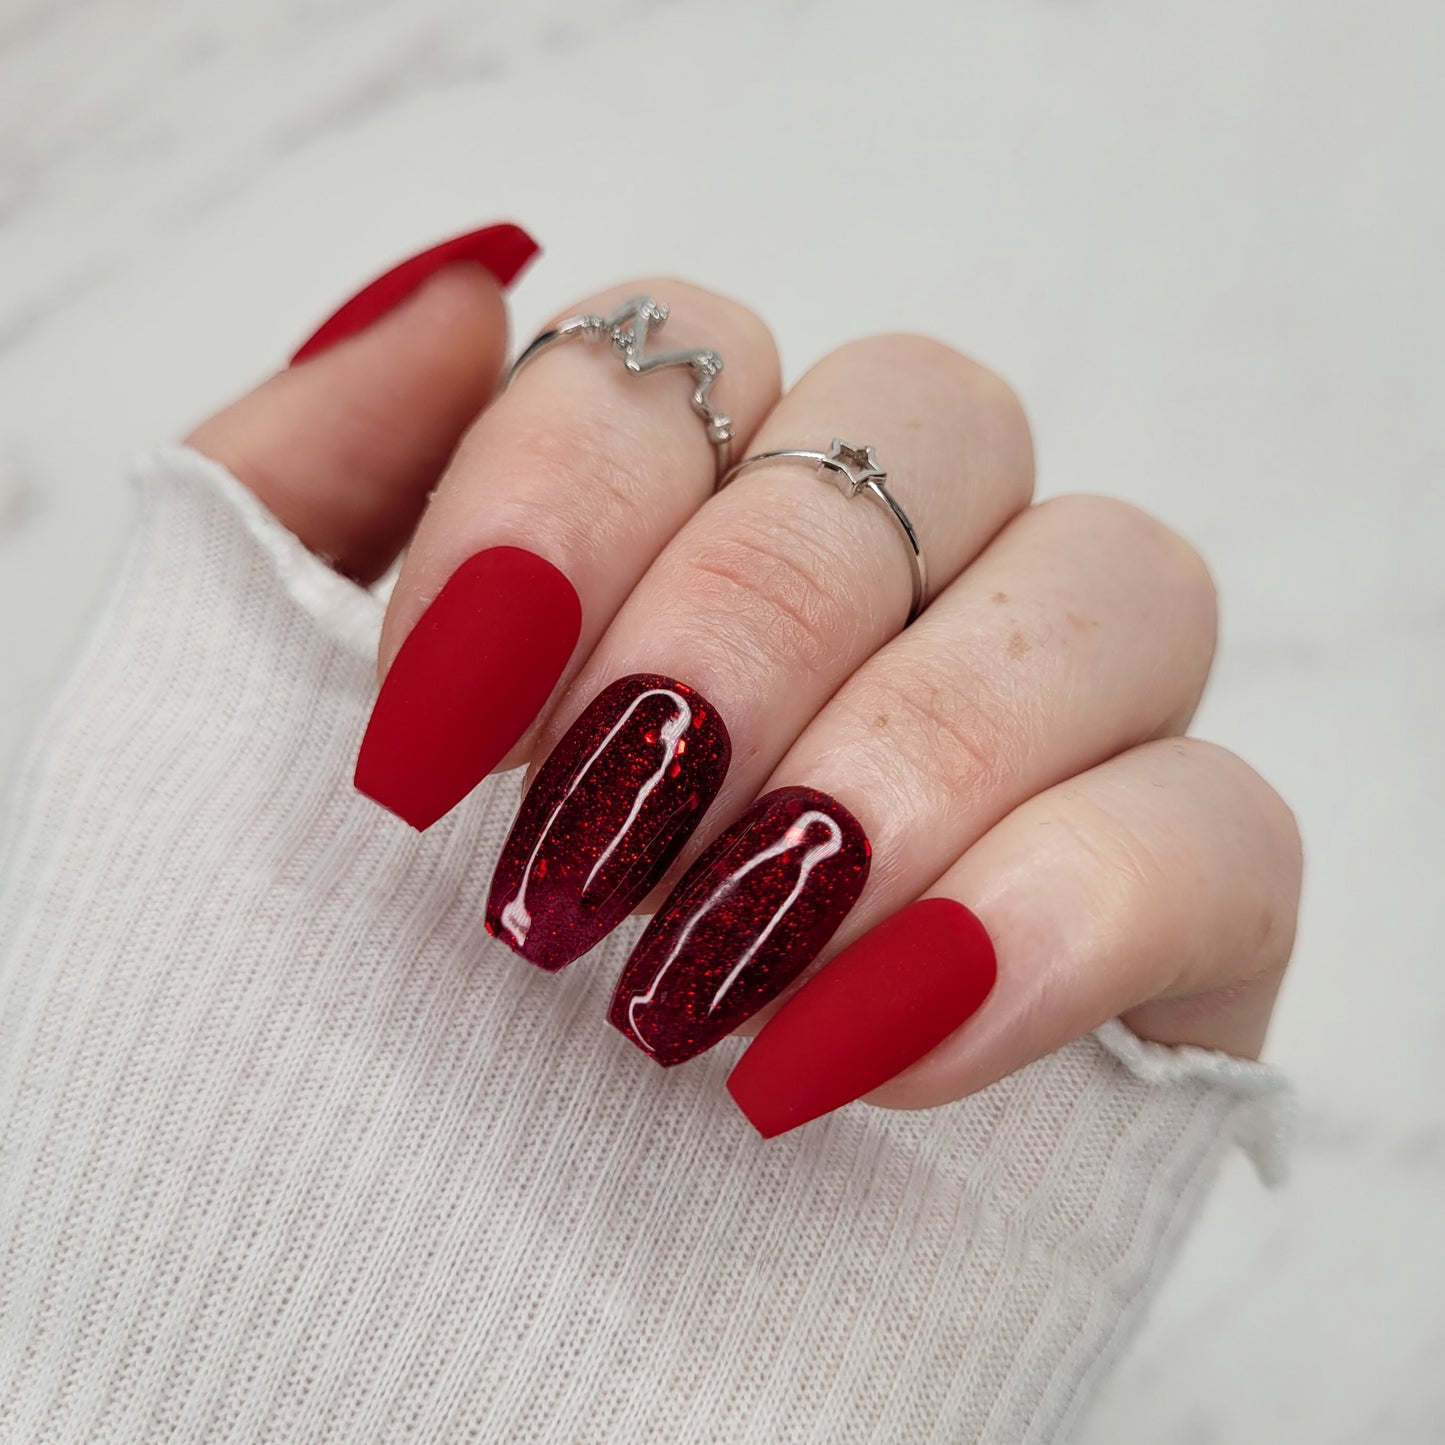 Red nails theory